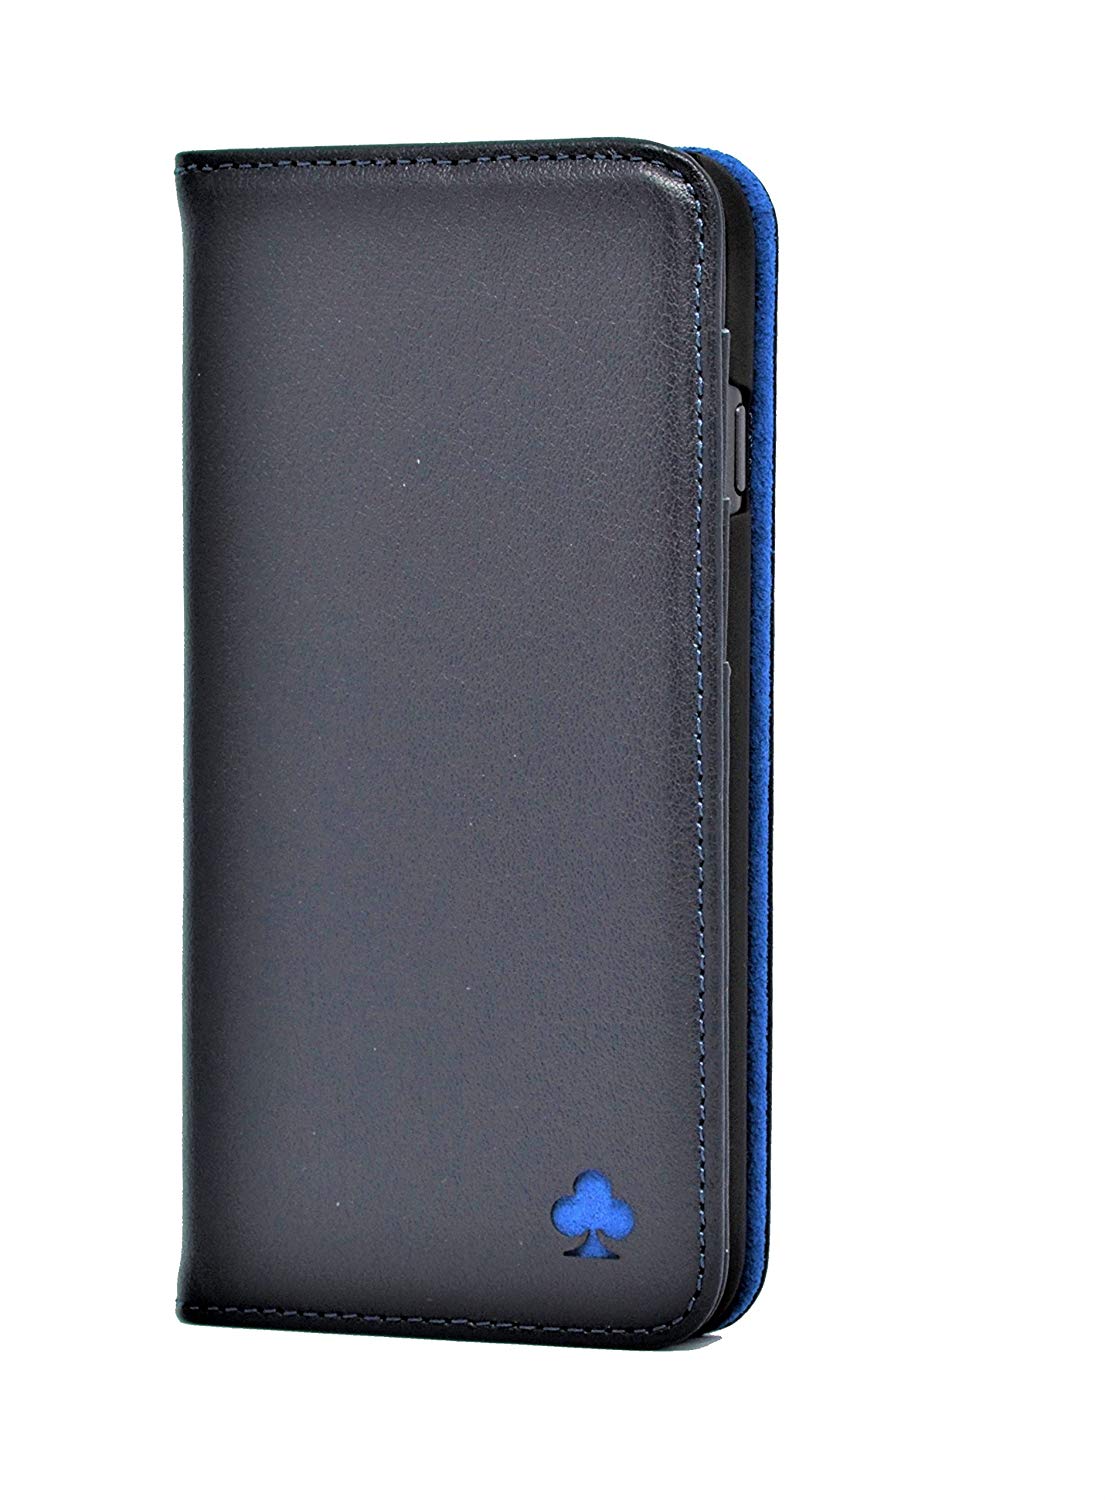 iPhone 6 / 6S Leather Case. Premium Slim Genuine Leather Stand Case/Cover/Wallet (Navy & Blue)